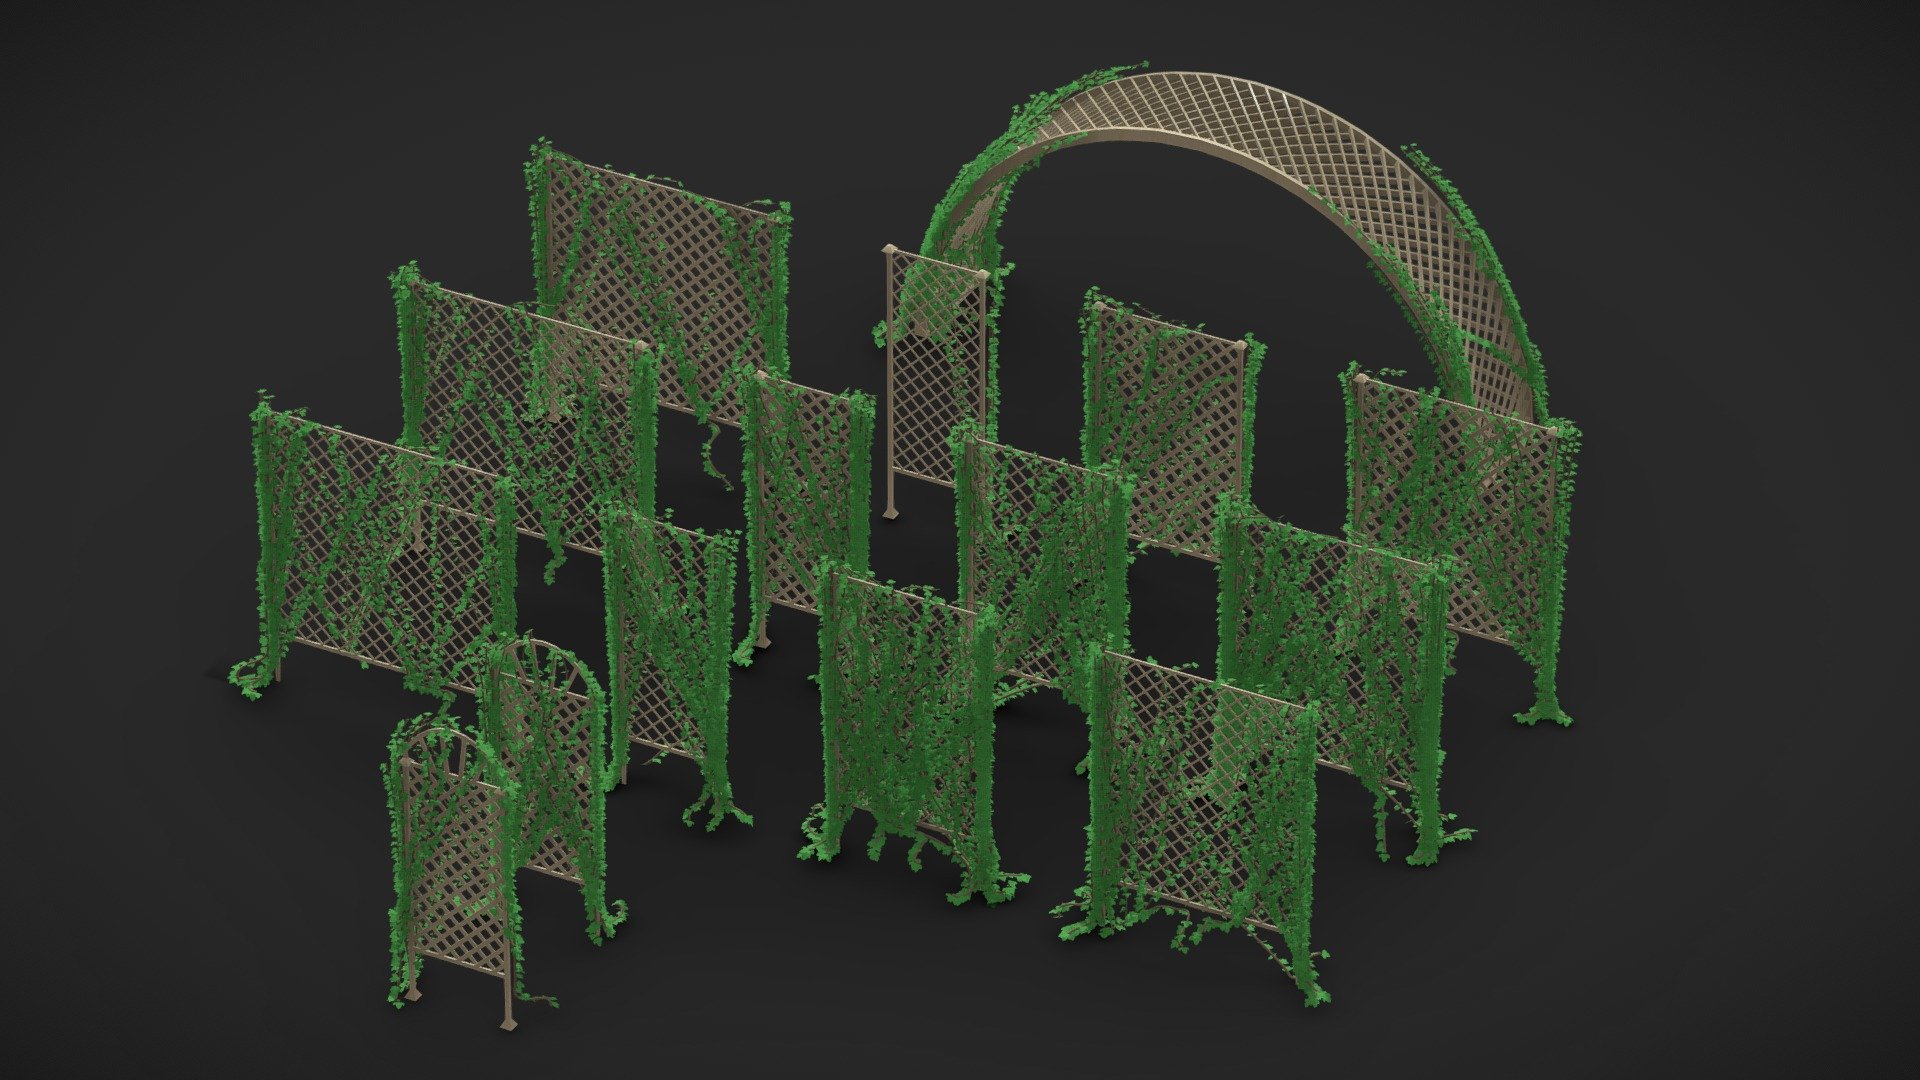 A set of Garden Lattice covered in Ivy.
6' x 2' , 6' x 3' , 6' x 4' , 6' x 5' with three variations. 
6' x 2' curved lattice and a 6' arch lattice.

Could also be used as a fence.

Check out my other Archviz packs on my page 3d model